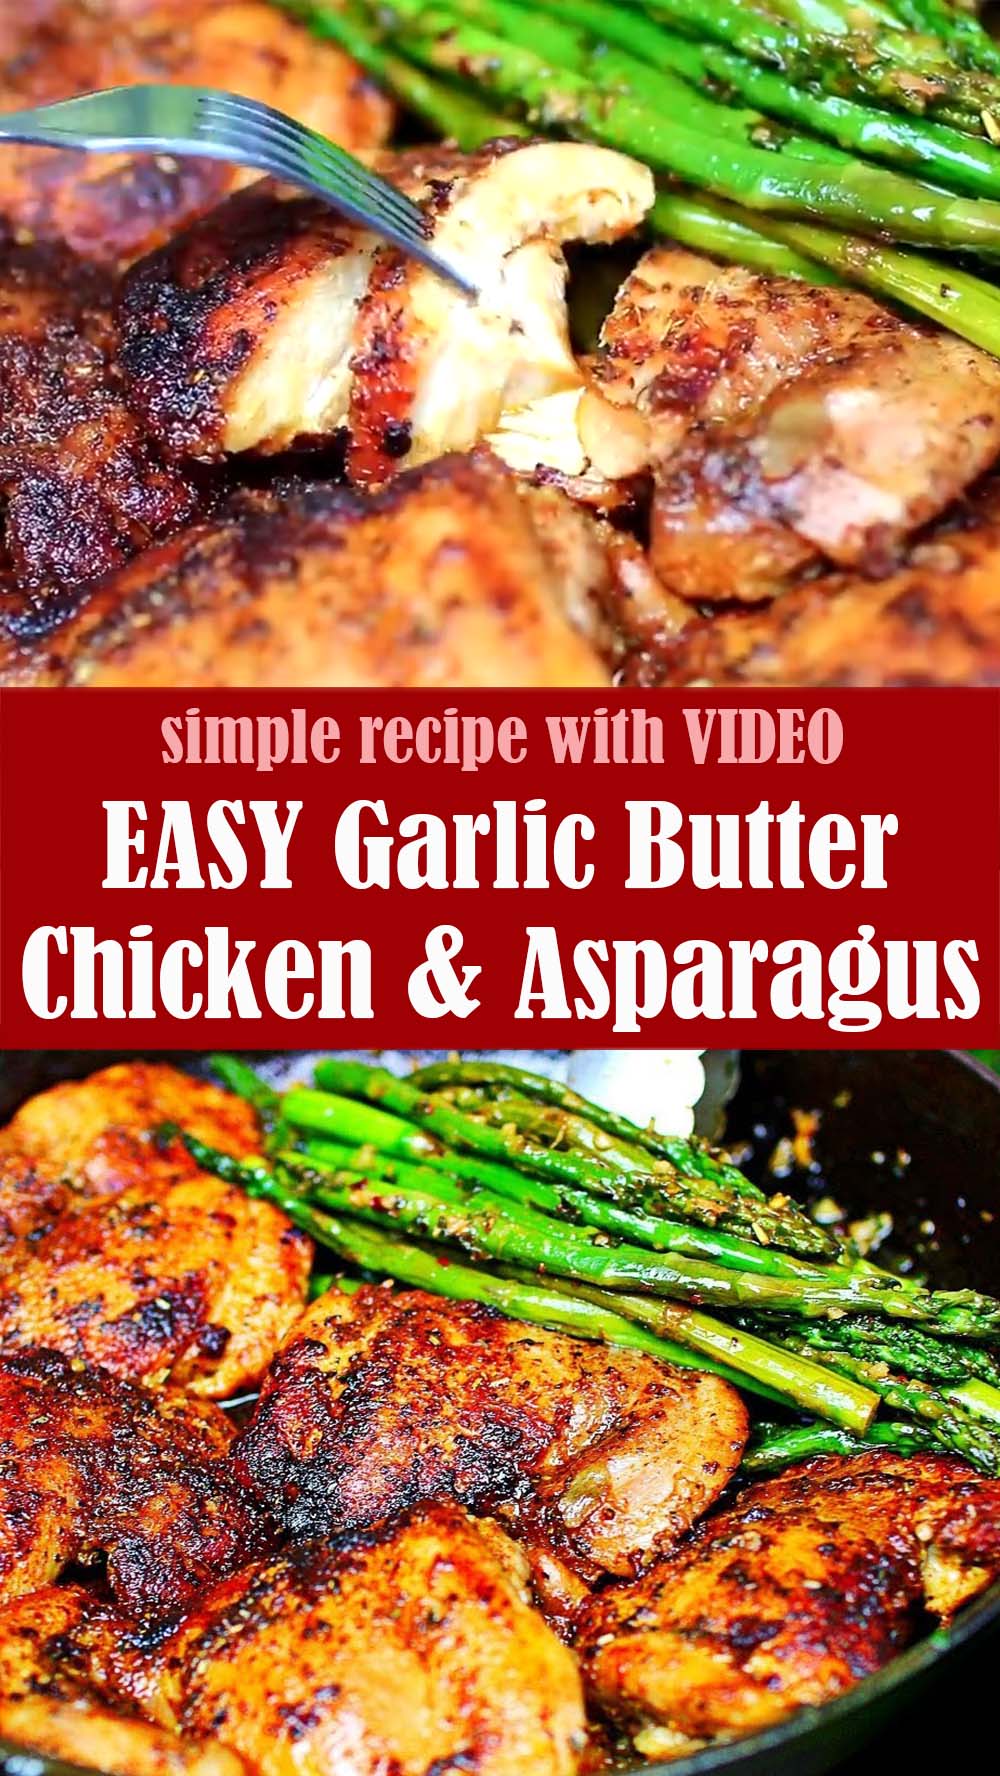 EASY Garlic Butter Chicken and Asparagus